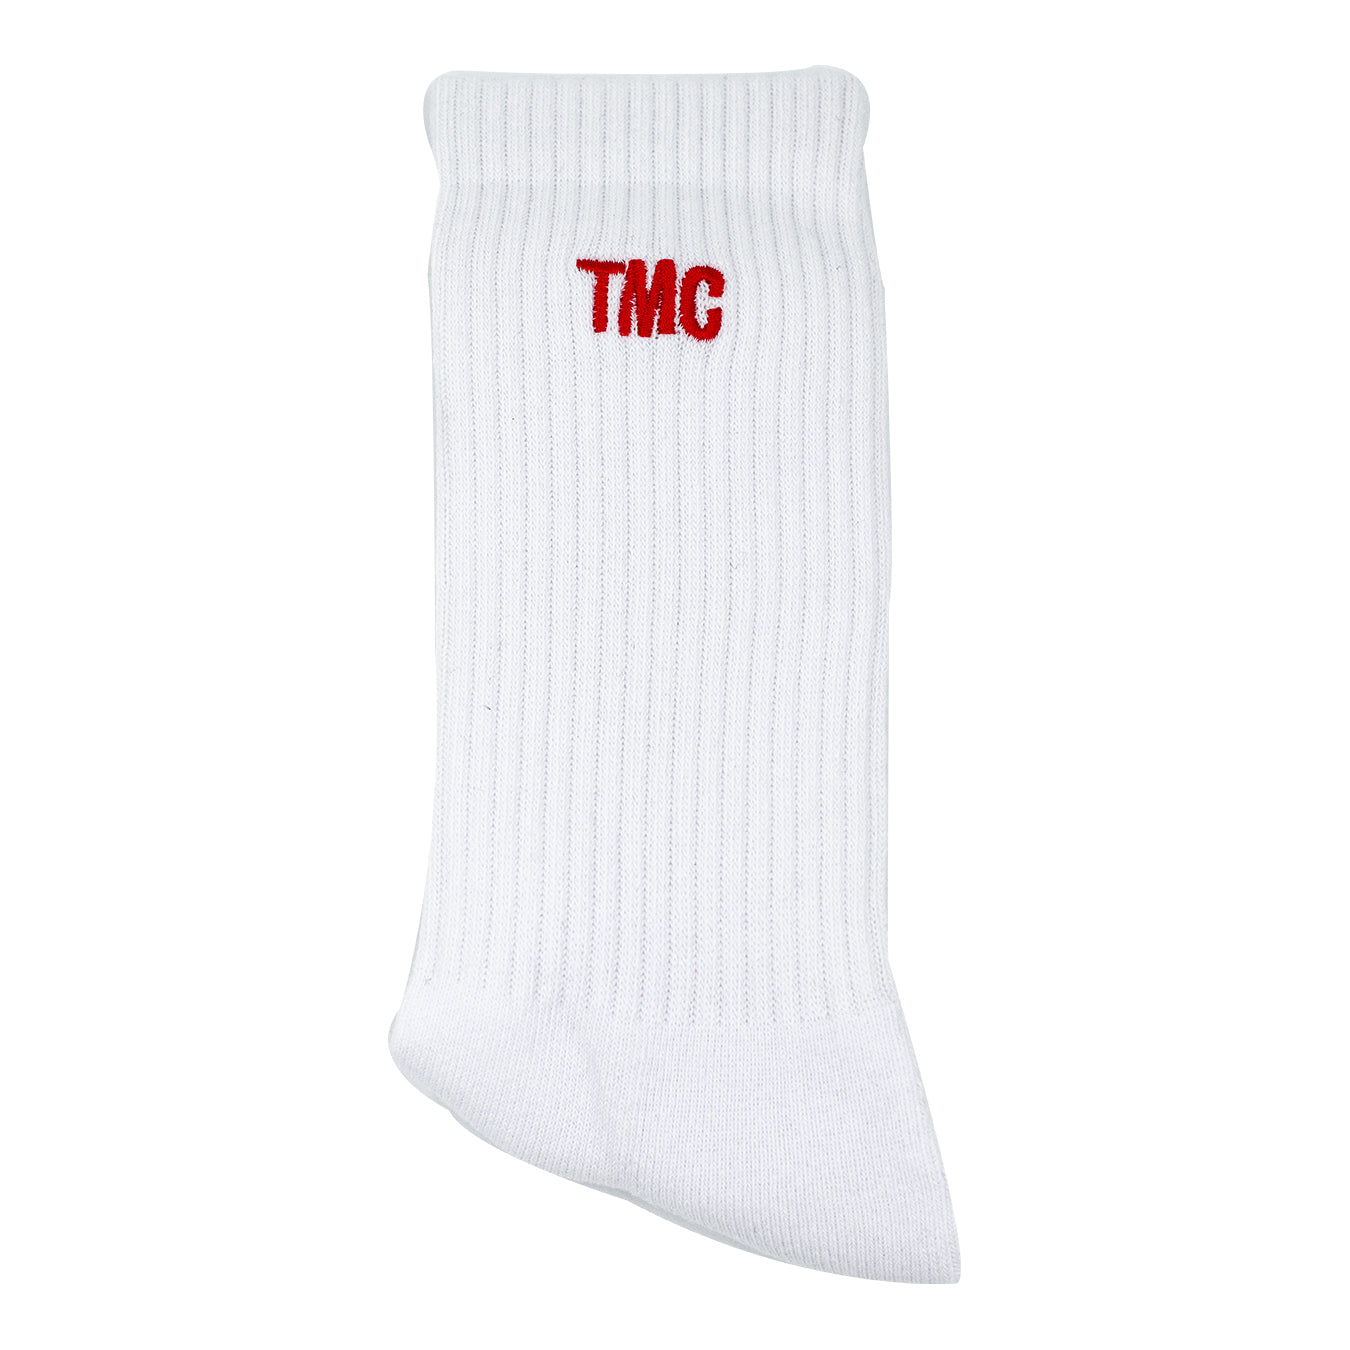 TMC (Embroidered) Sock - White/Red